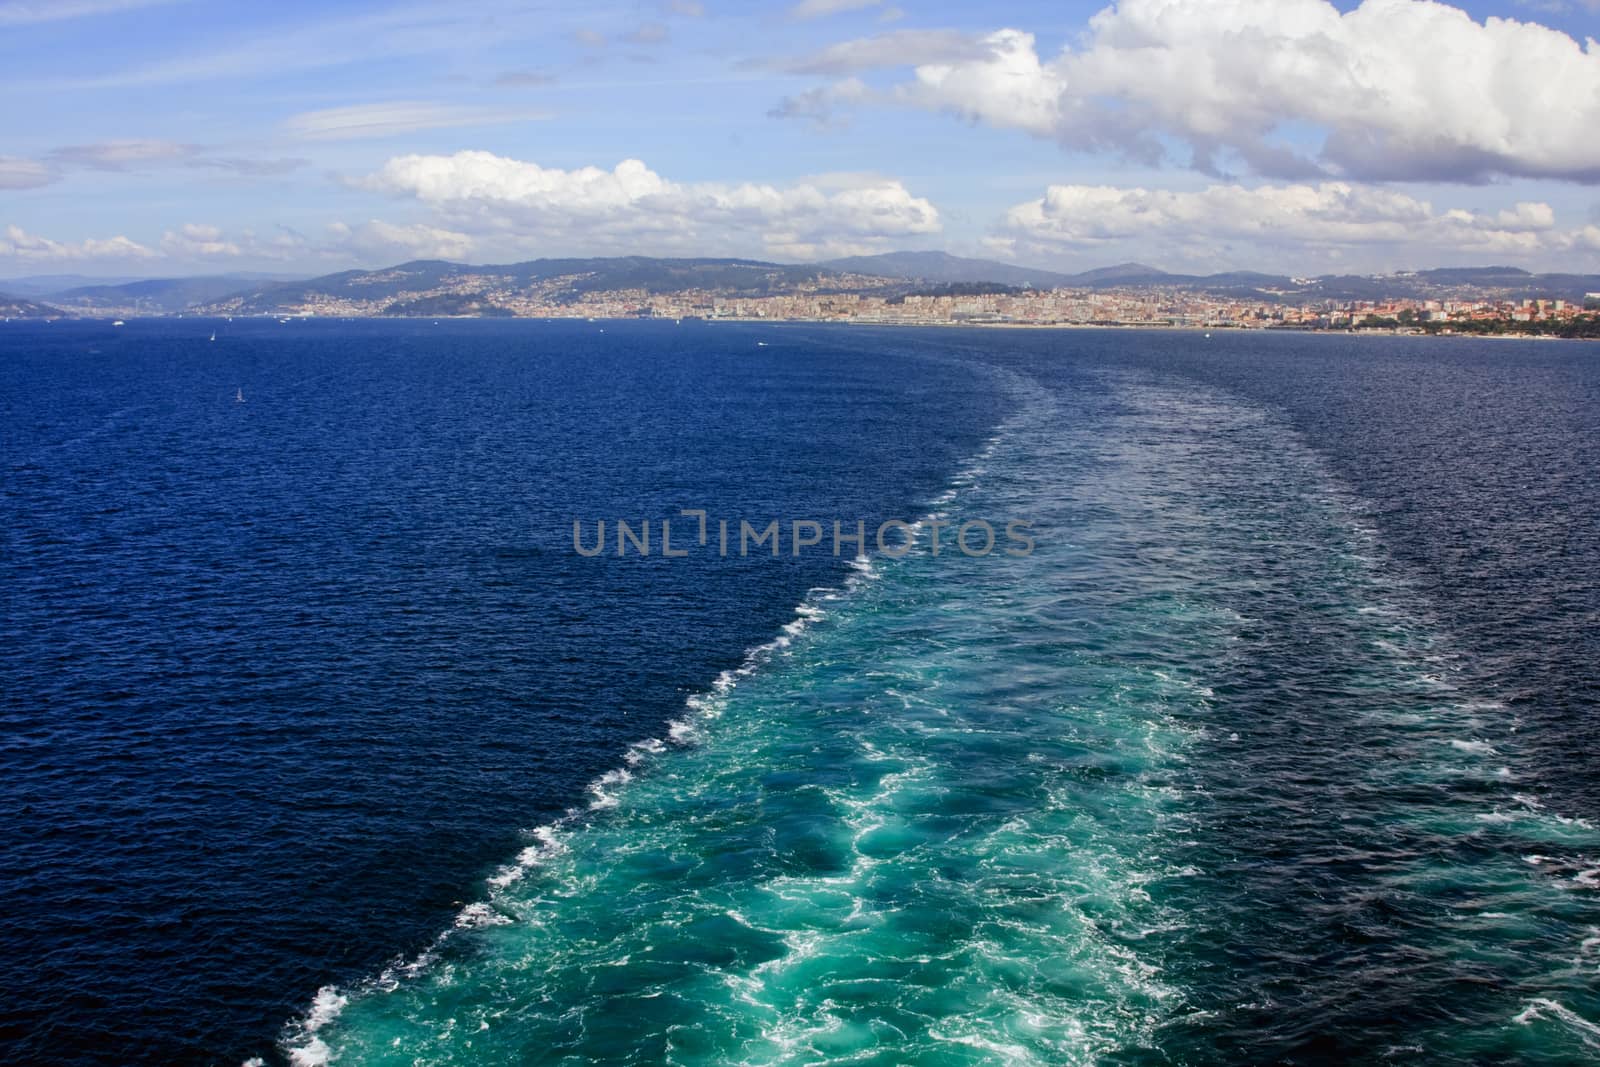 A ship's wake as it departs the port of Vigo in northern Spain.